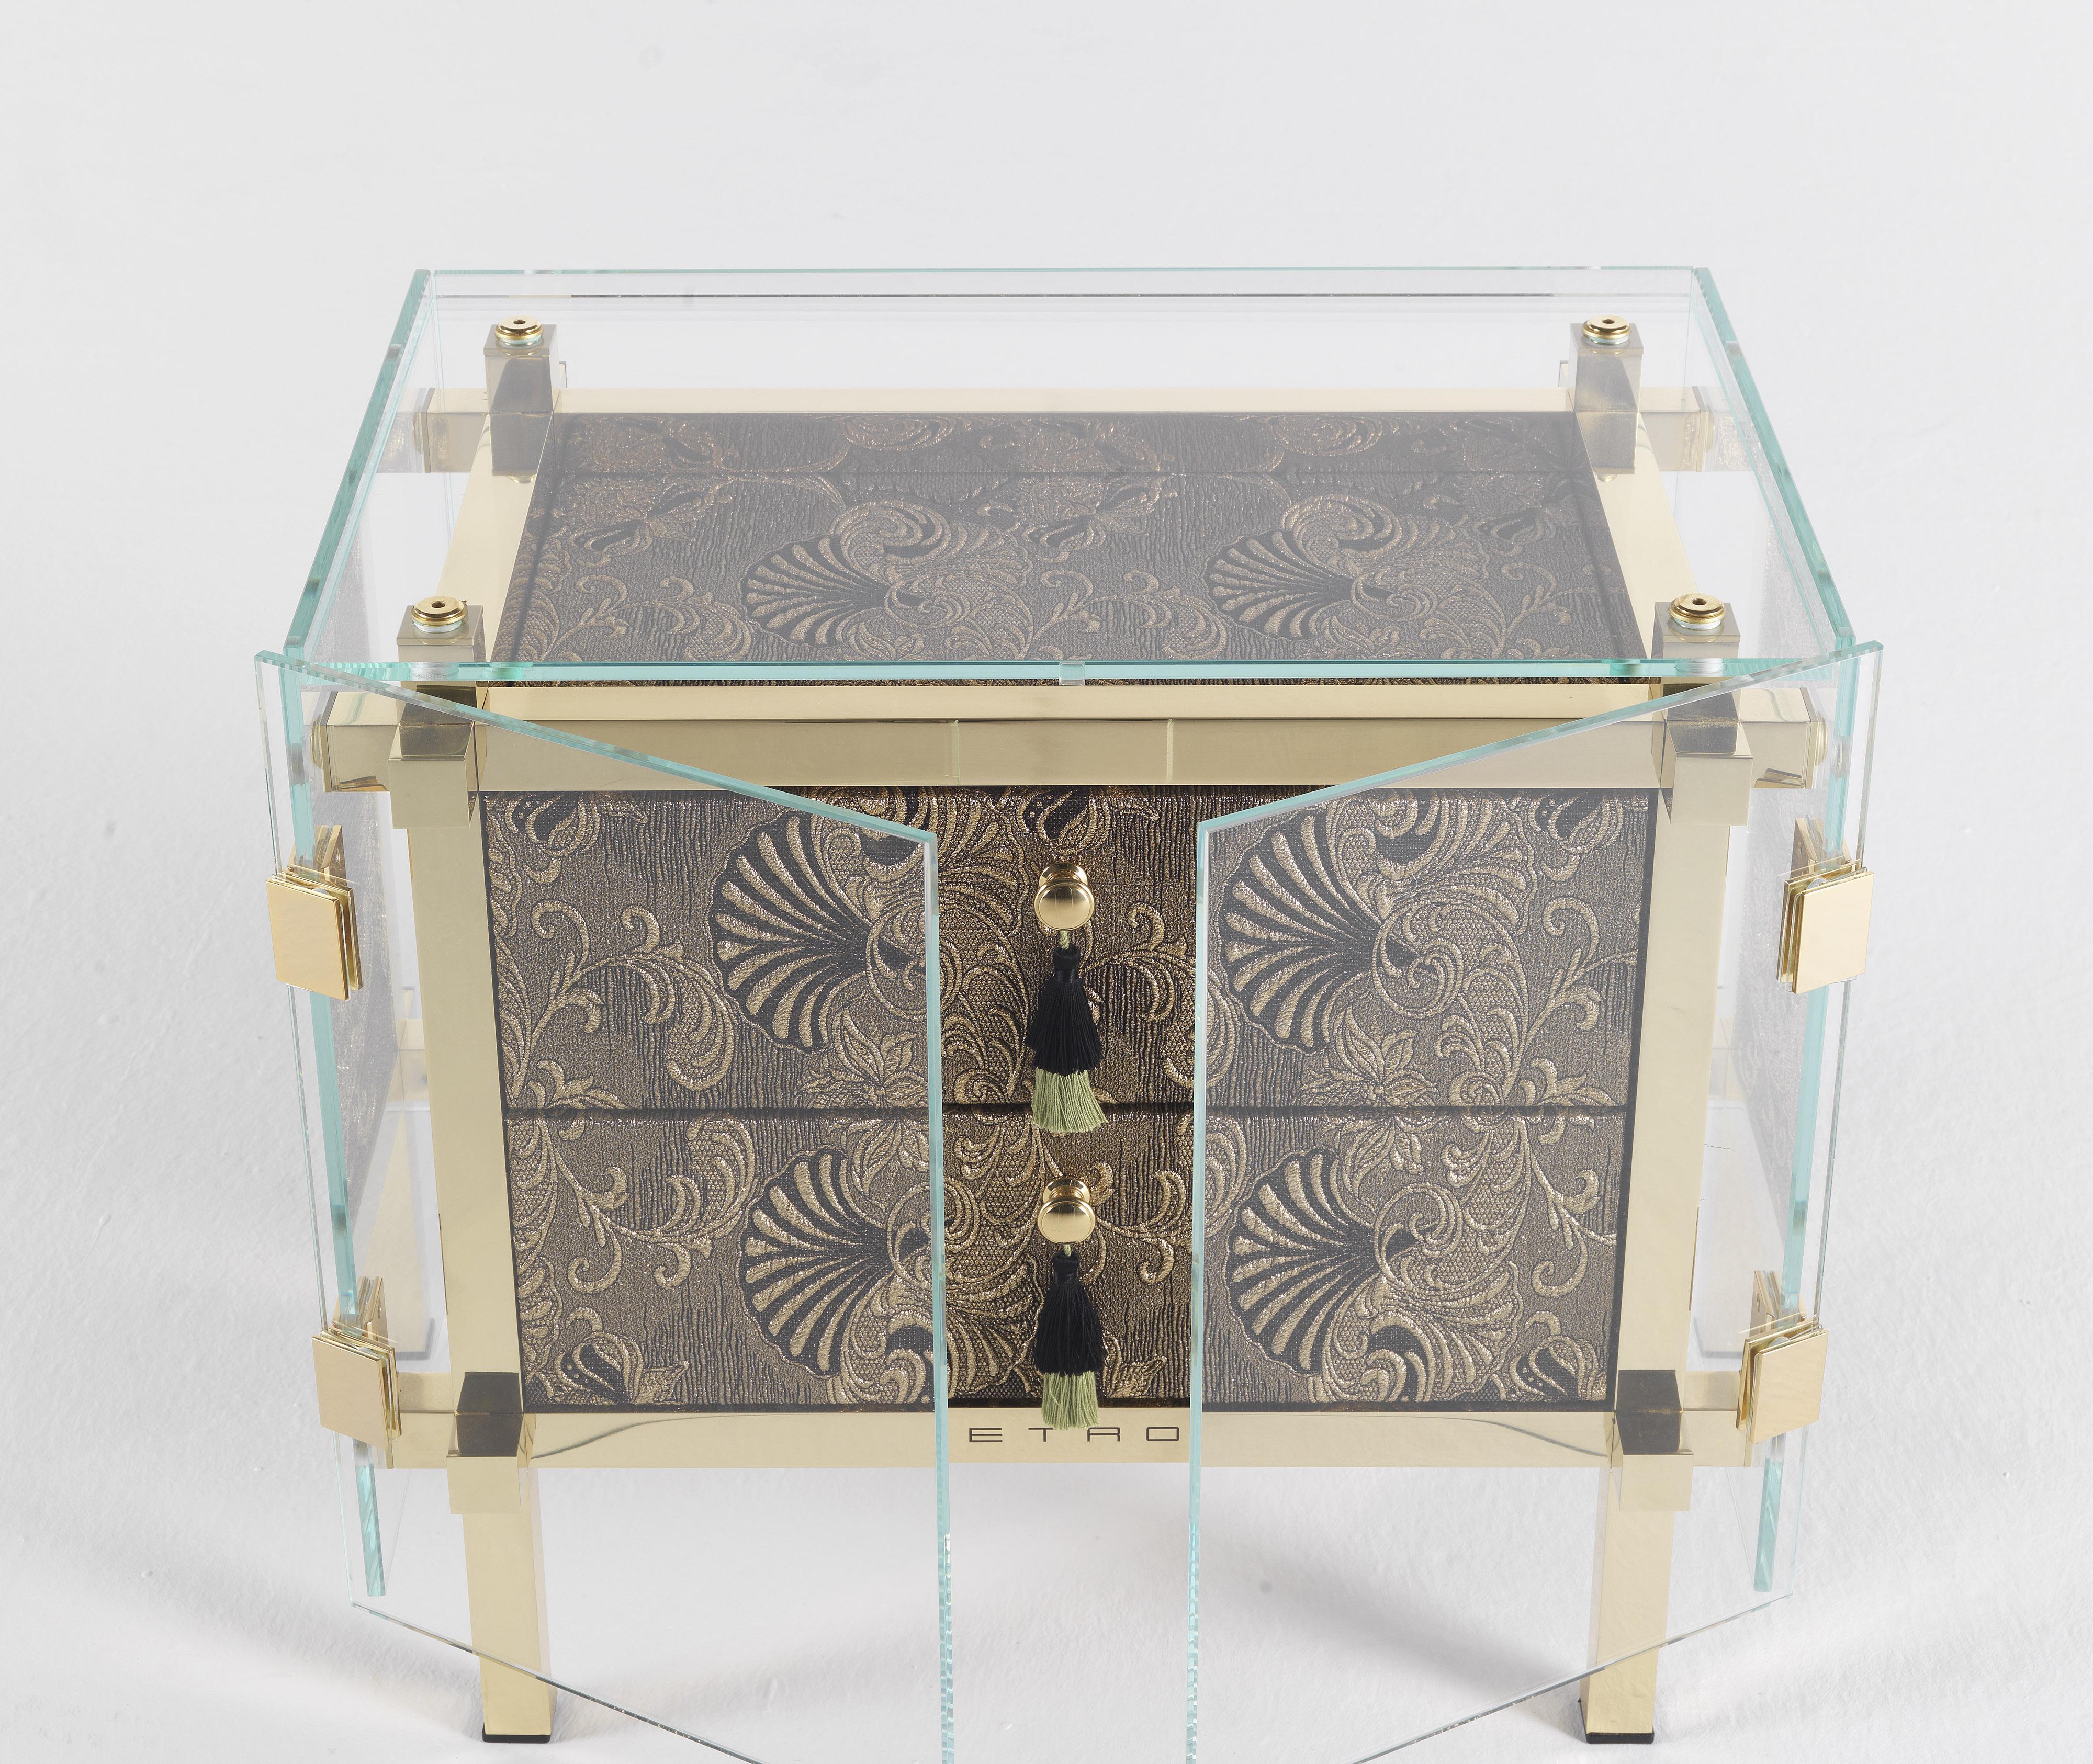 Italian Etro Home Interiors Delhi Night Table in Fabric and Polished Brass